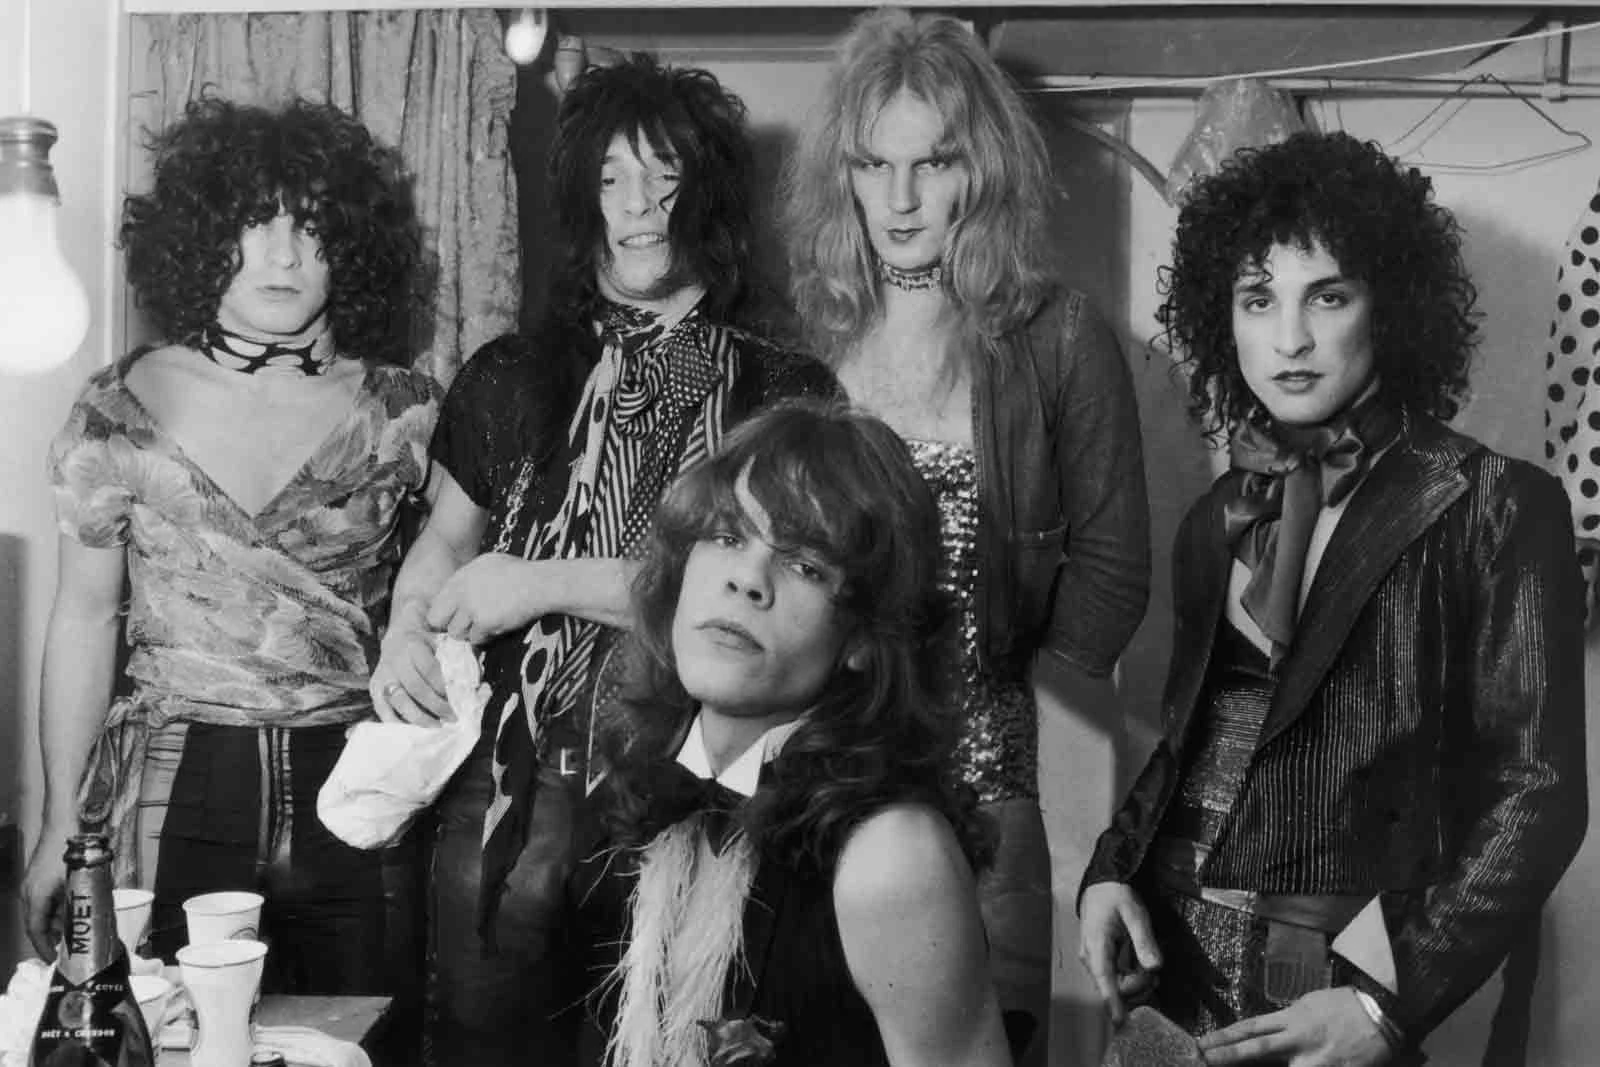 5 Reasons New York Dolls Should Be in the Rock Hall